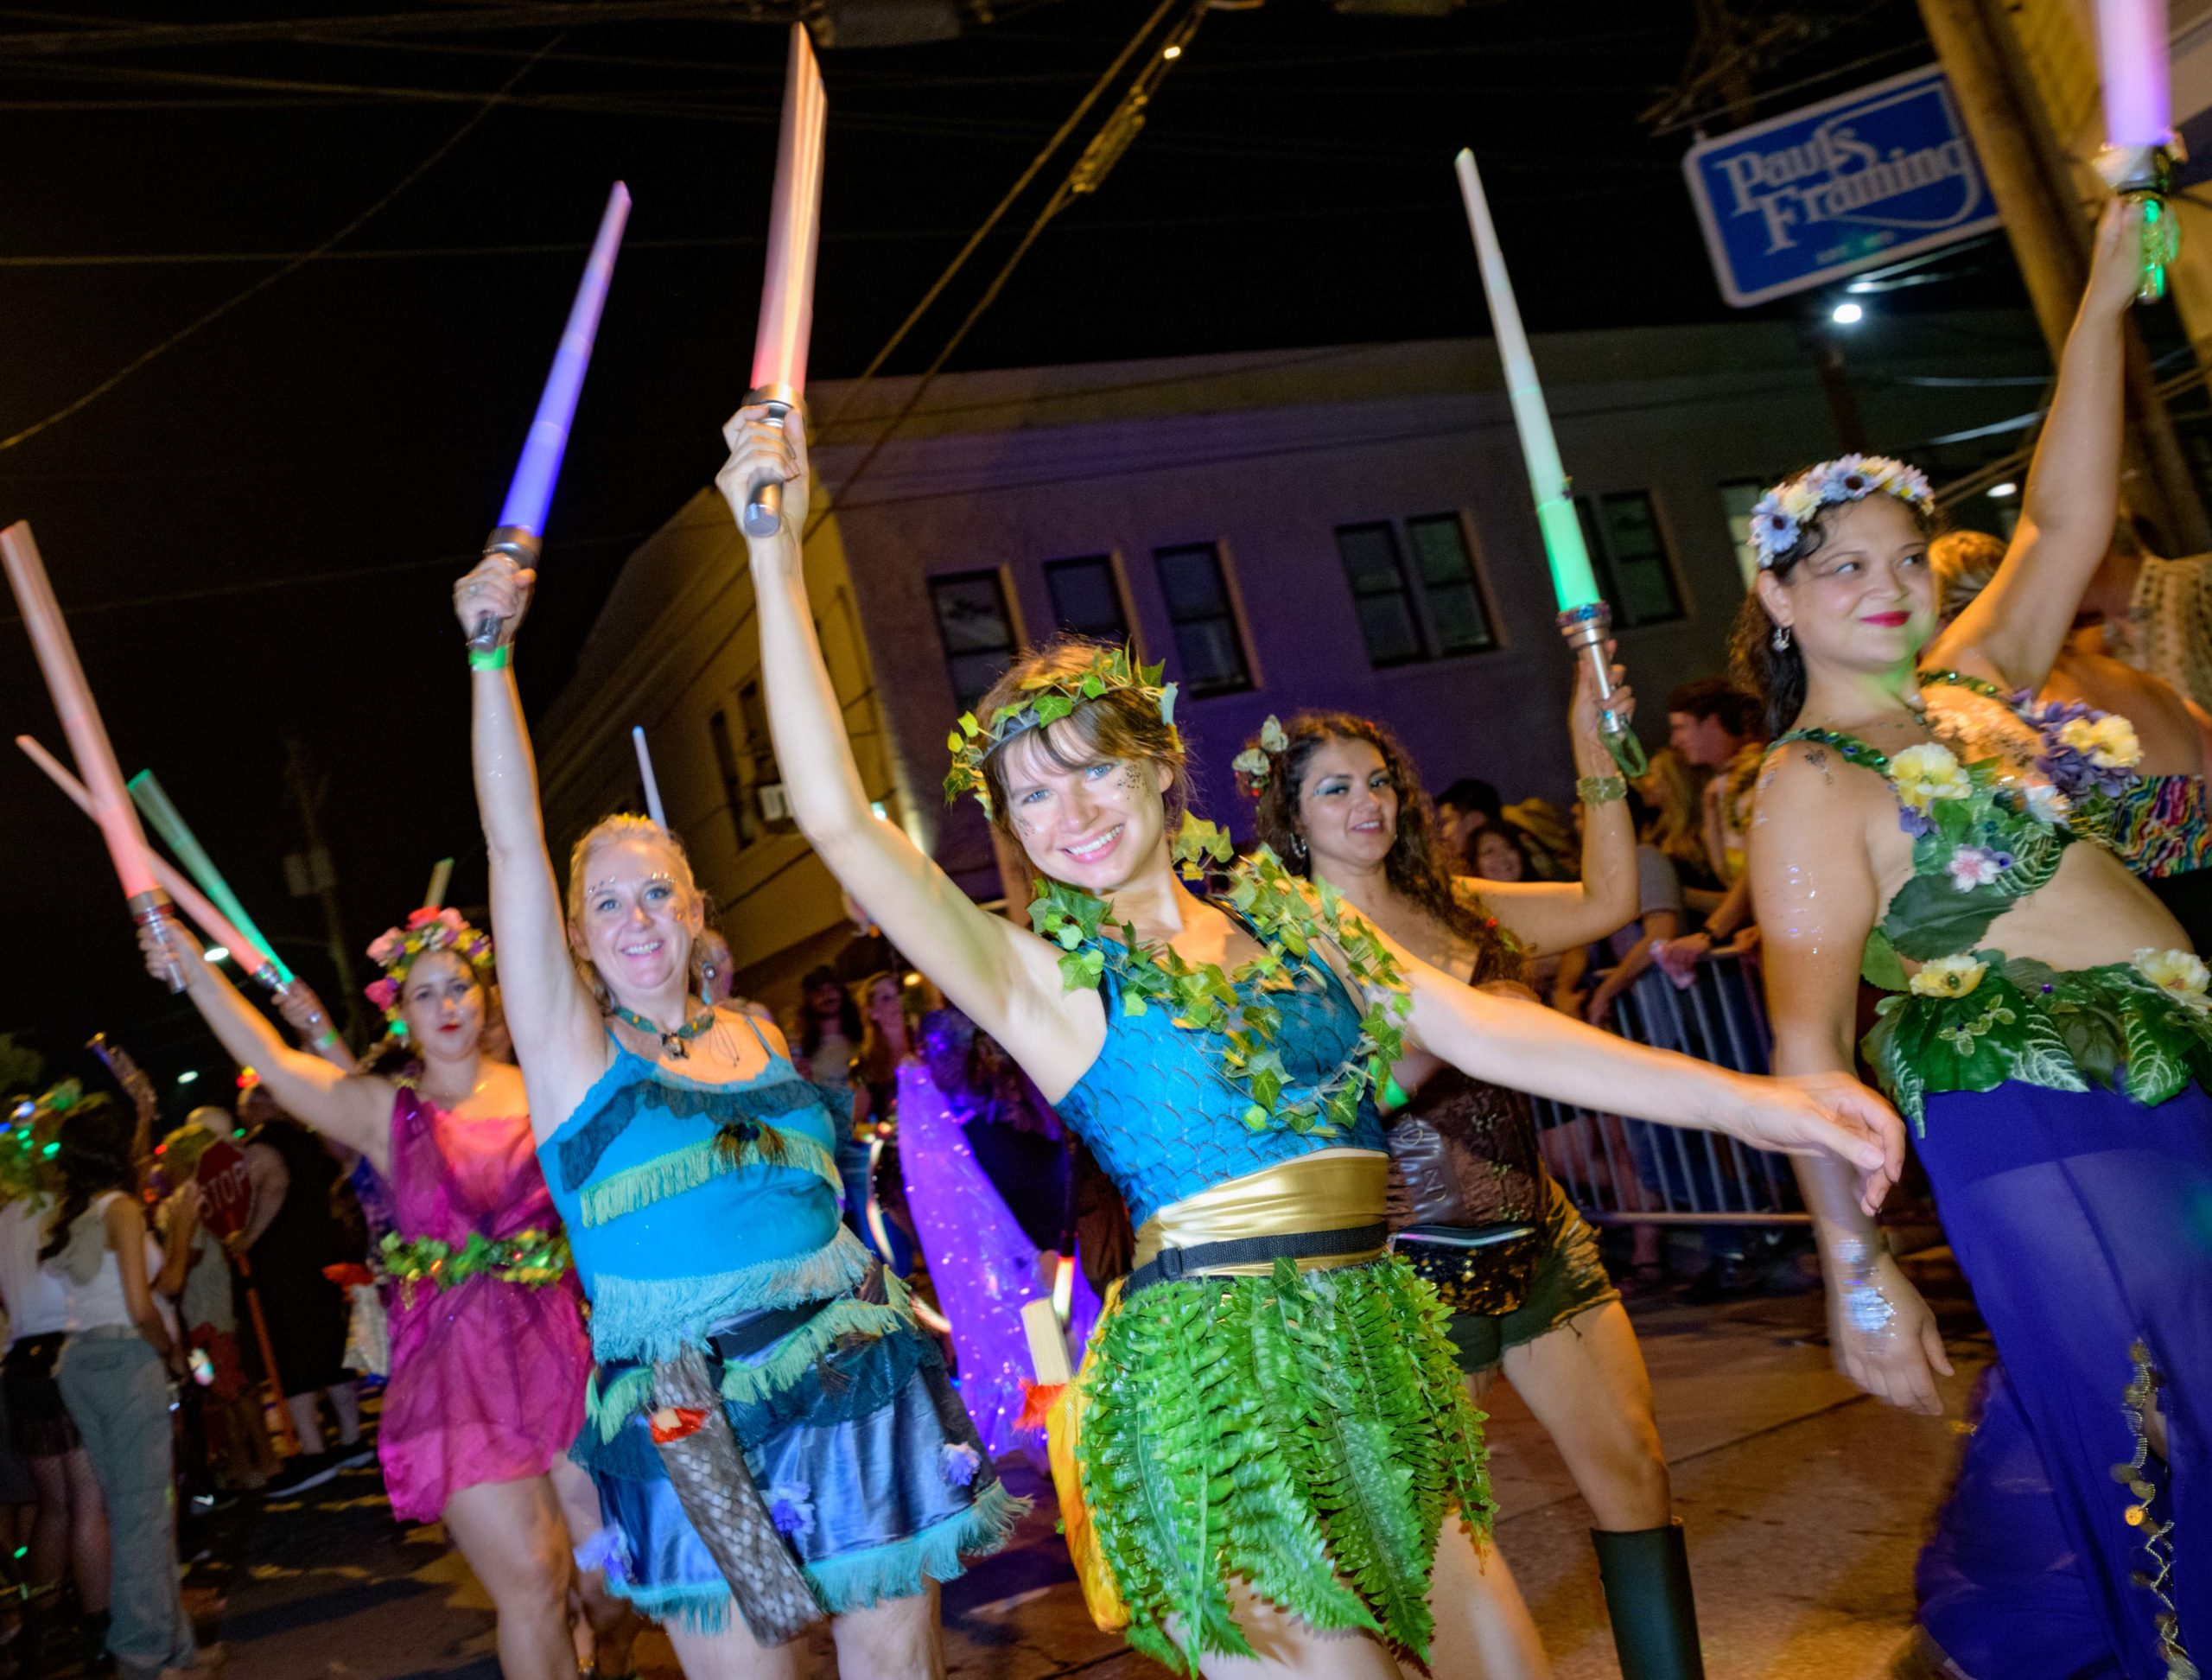 Queen Anne and King Robustus XXXIII reign over MidSummer Mardi Gras XXXIII lead by the Krewe of Oak on Oak Street Saturday, August 24, 2019. The theme of this year’s parade is ‘Wild in the Wetlands.’ The Muff-A-Lottas dance group celebrated its 10th annual MidSummer parade dancing down the streets with members of the Krewe of Chewbacchus, the Organ Grinders Sexah Monkeys, Tap Dat, the Brazilian style carnival group Bloco Sereia, Bosom Buddies, Crescent City Fae, the Cougar Patrol, Bayou Babes, and an assortment of other costumed revelers and other krewes. The krewes paraded down Carrolton Ave to Palmer Park and back to Oak street to mark the halfway point, 184
 days, to Mardi Gras 2020. Photo by Matthew Hinton